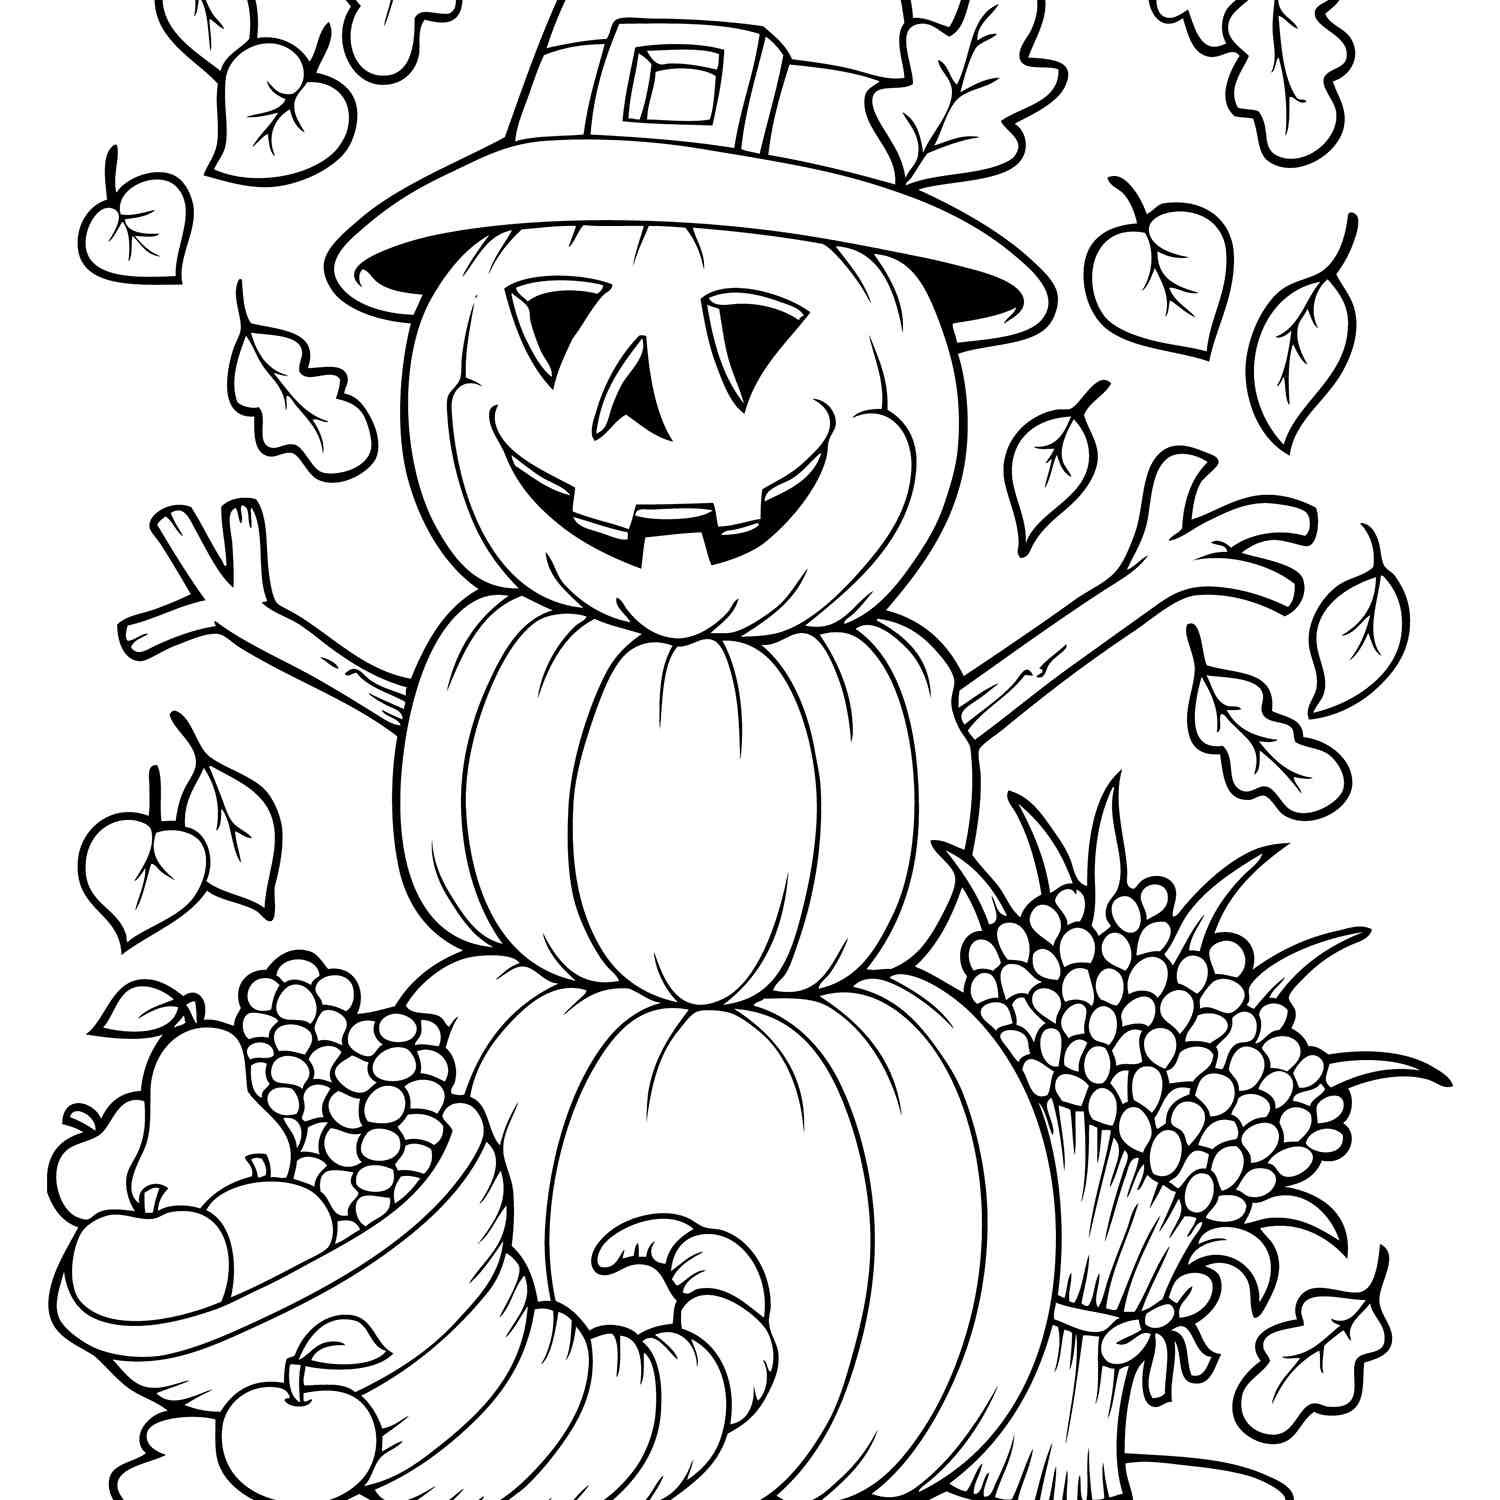 19 Places to Find Free Autumn and Fall Coloring Pages